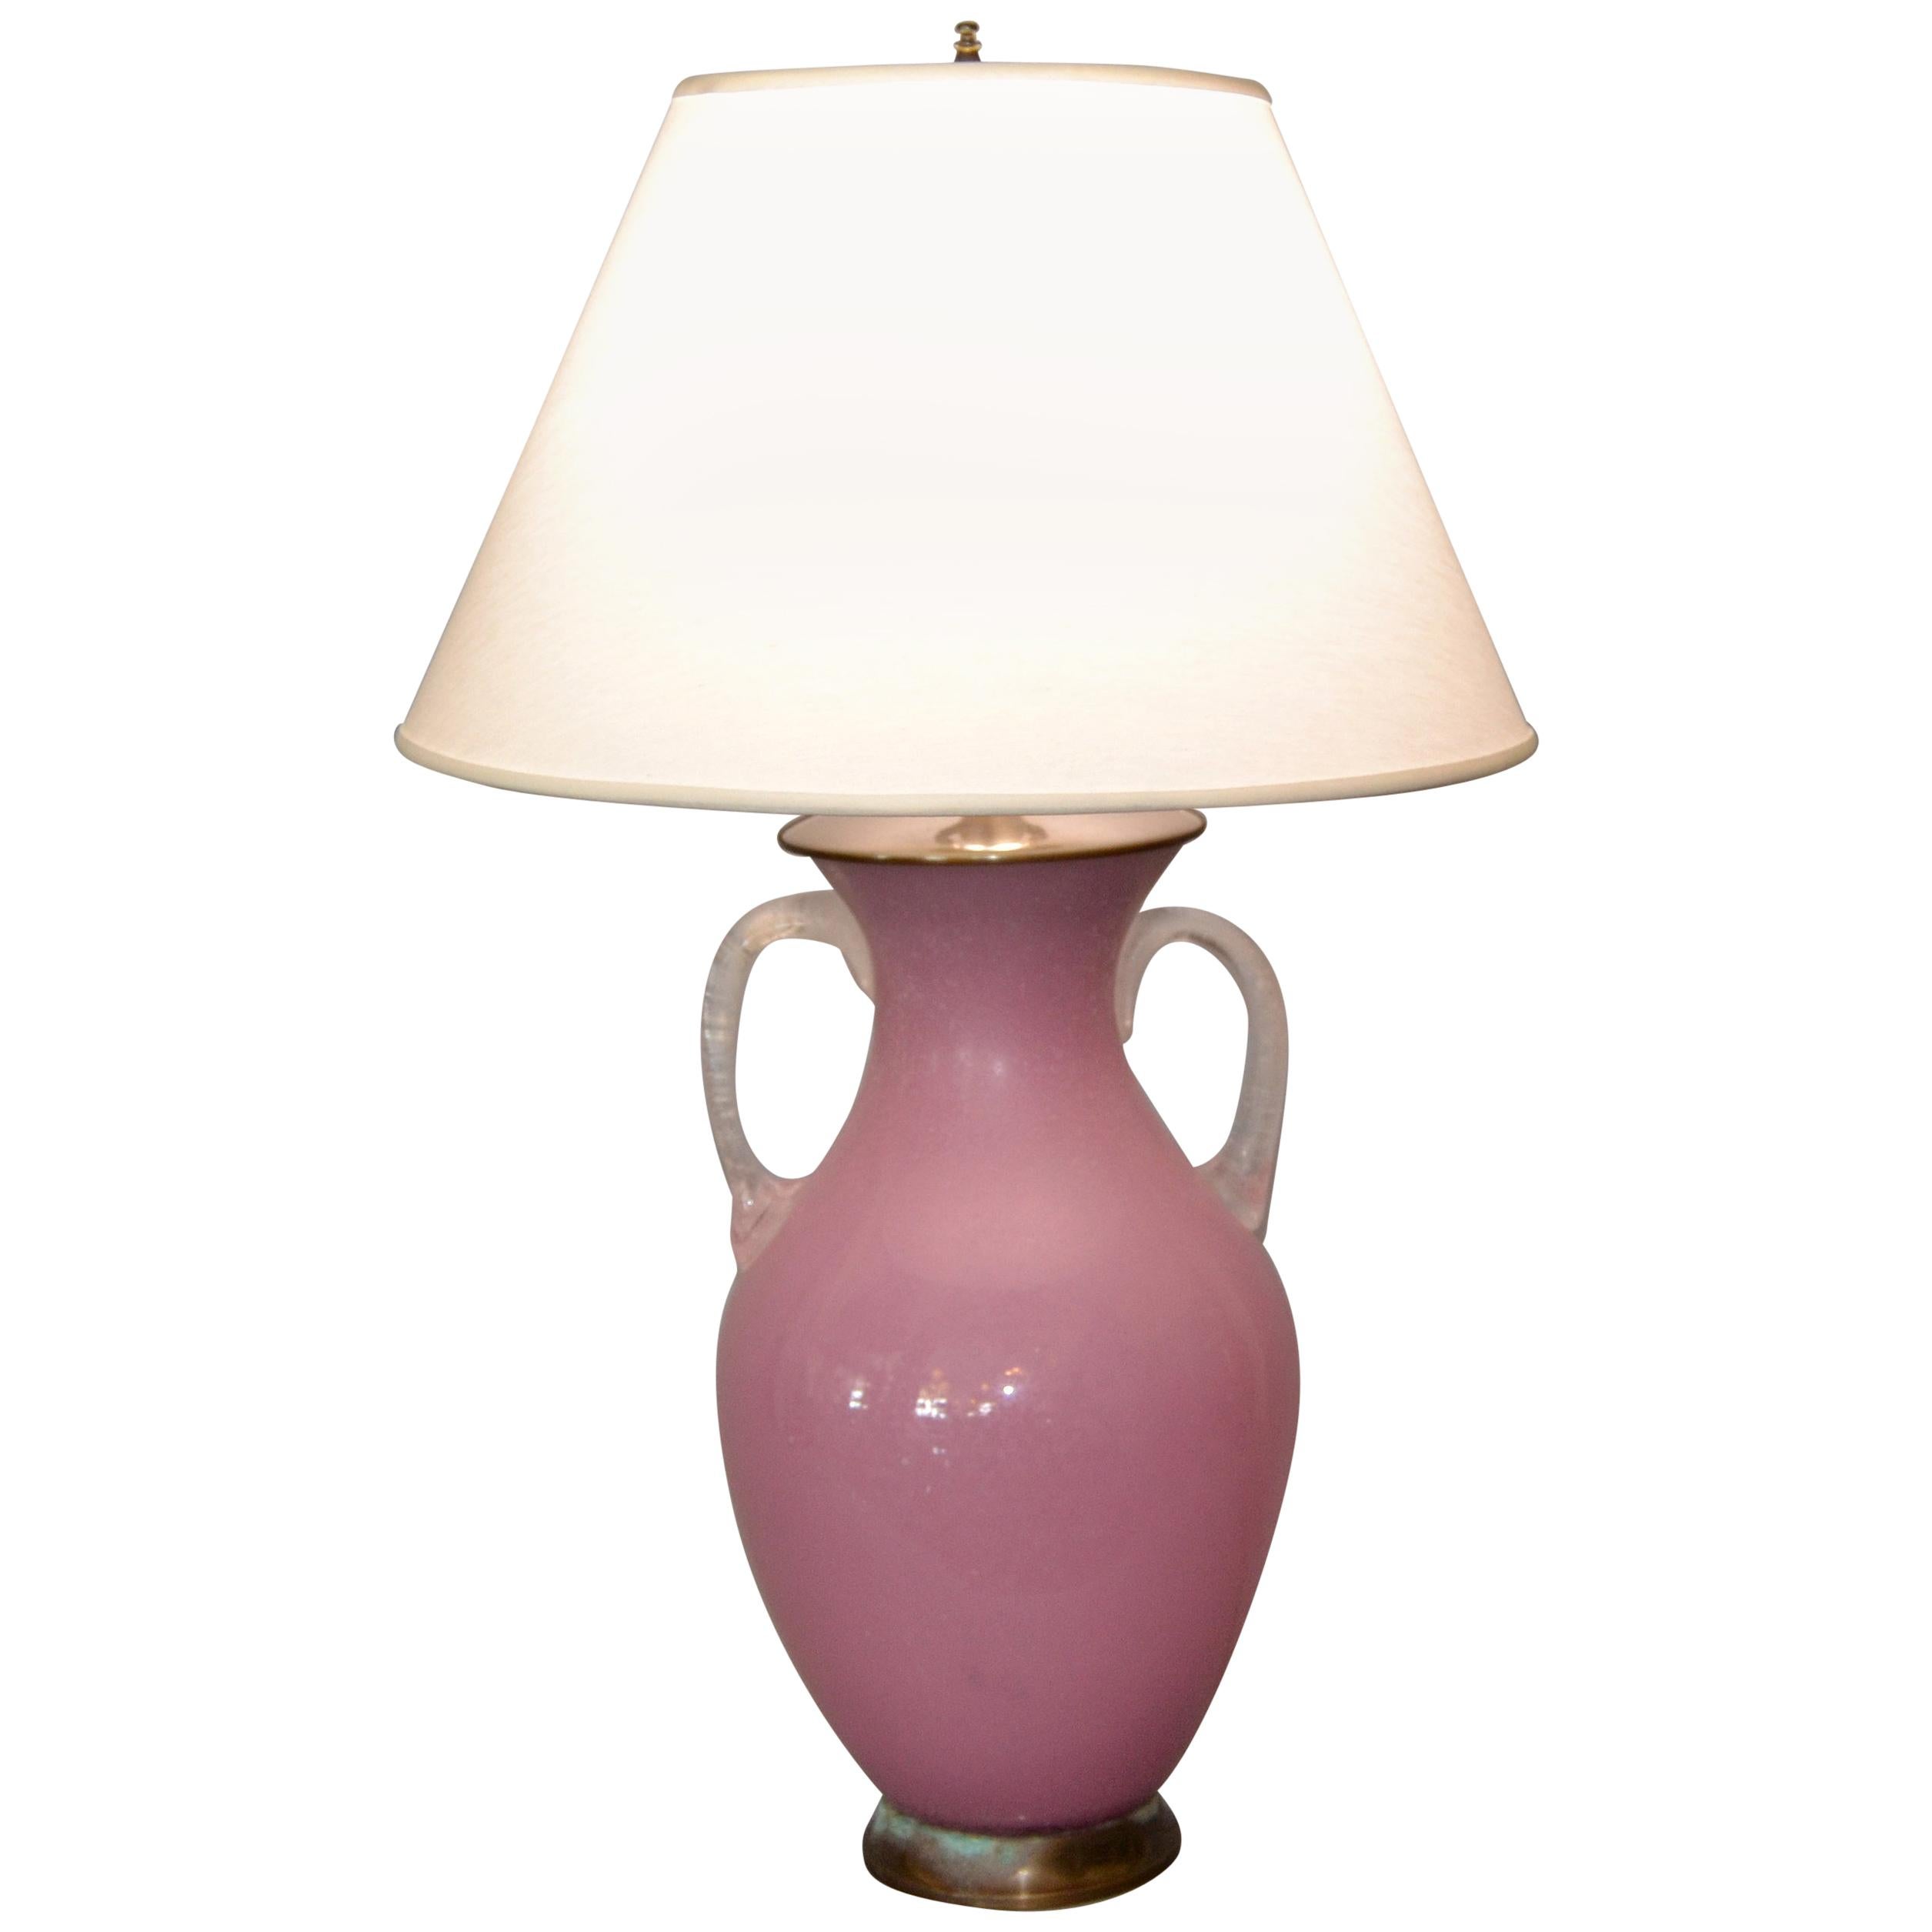 Mid-Century Modern blown Scavo glass handled pink and clear table lamp by Chapman.
The top and base are made out of brass. Comes with the harp and finial.
In perfect working condition and uses a max. 60 watts light bulb.
Good vintage condition with